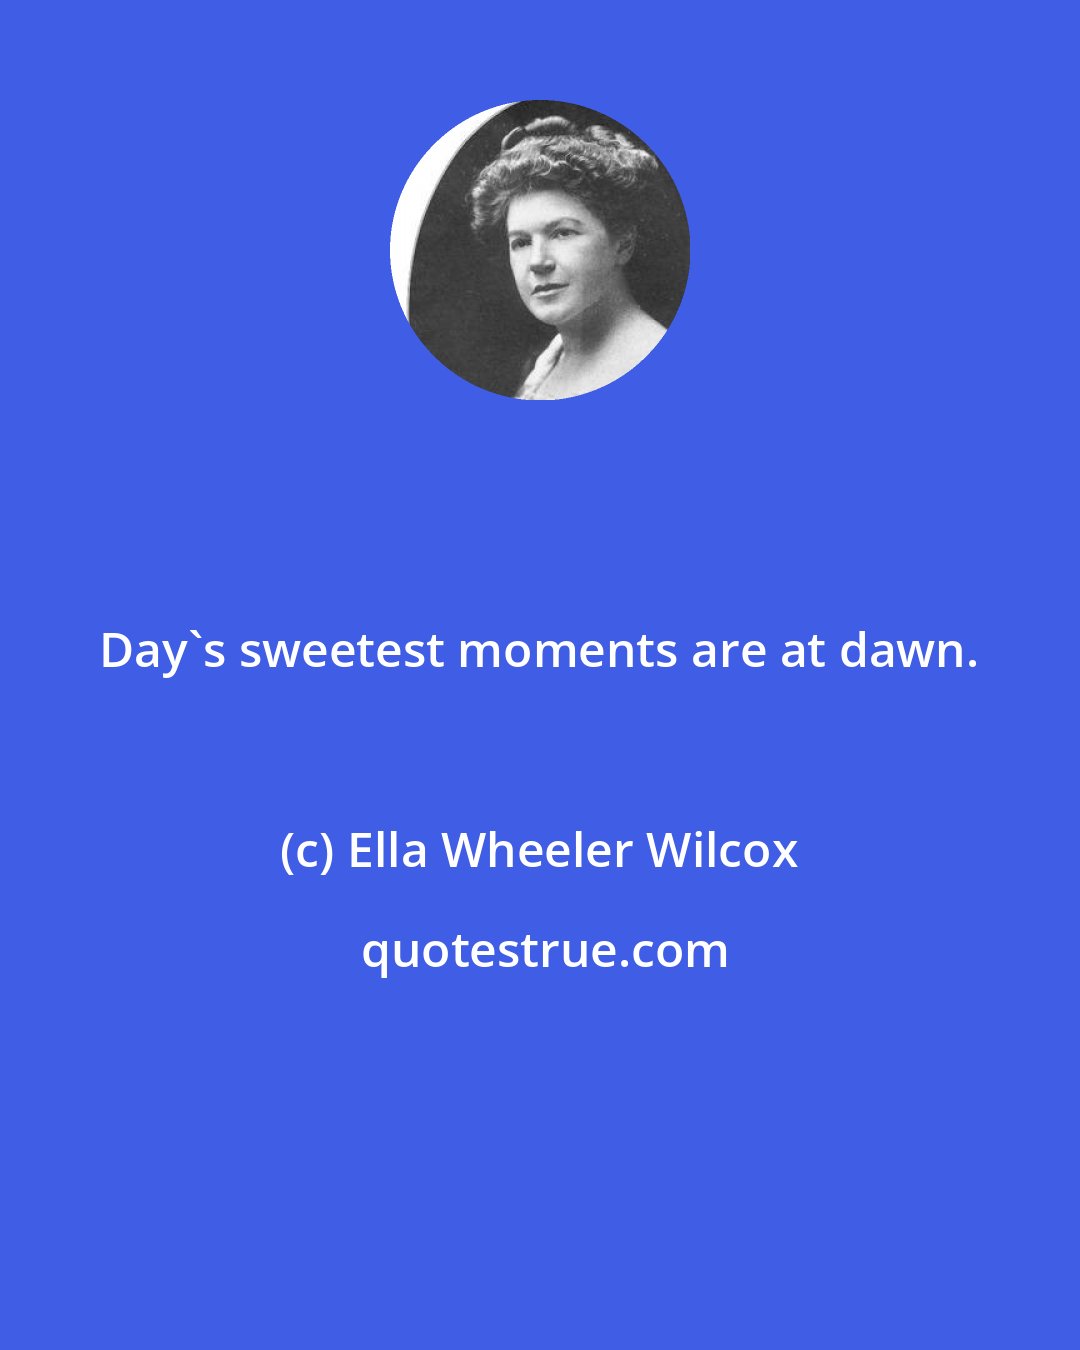 Ella Wheeler Wilcox: Day's sweetest moments are at dawn.